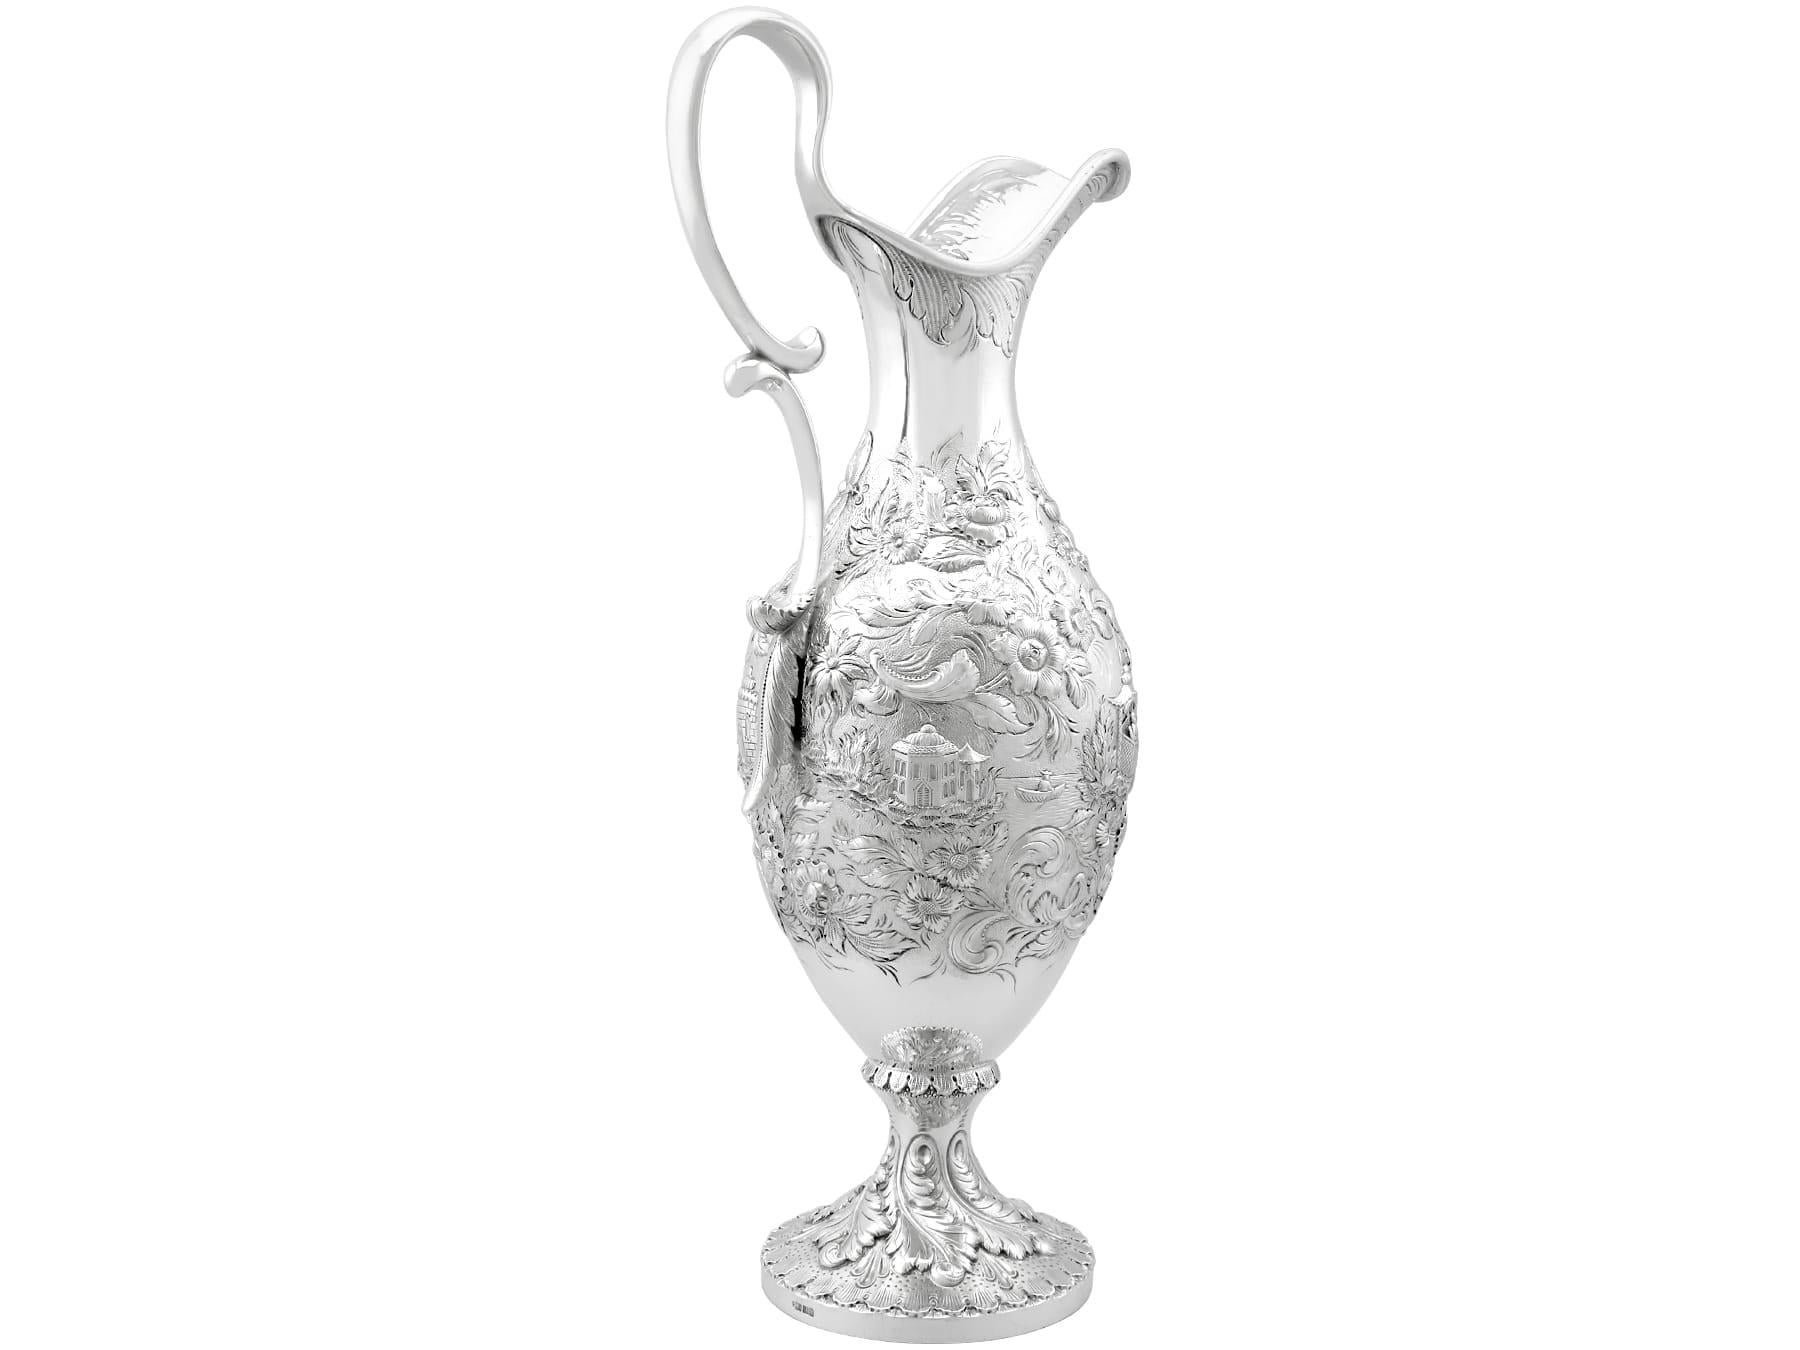 This magnificent antique 19th century American silver claret jug has baluster form onto a plain circular spreading foot.

The body of this antique jug is embellished with exceptional chased decoration, displaying a Chinoiserie style landscape and